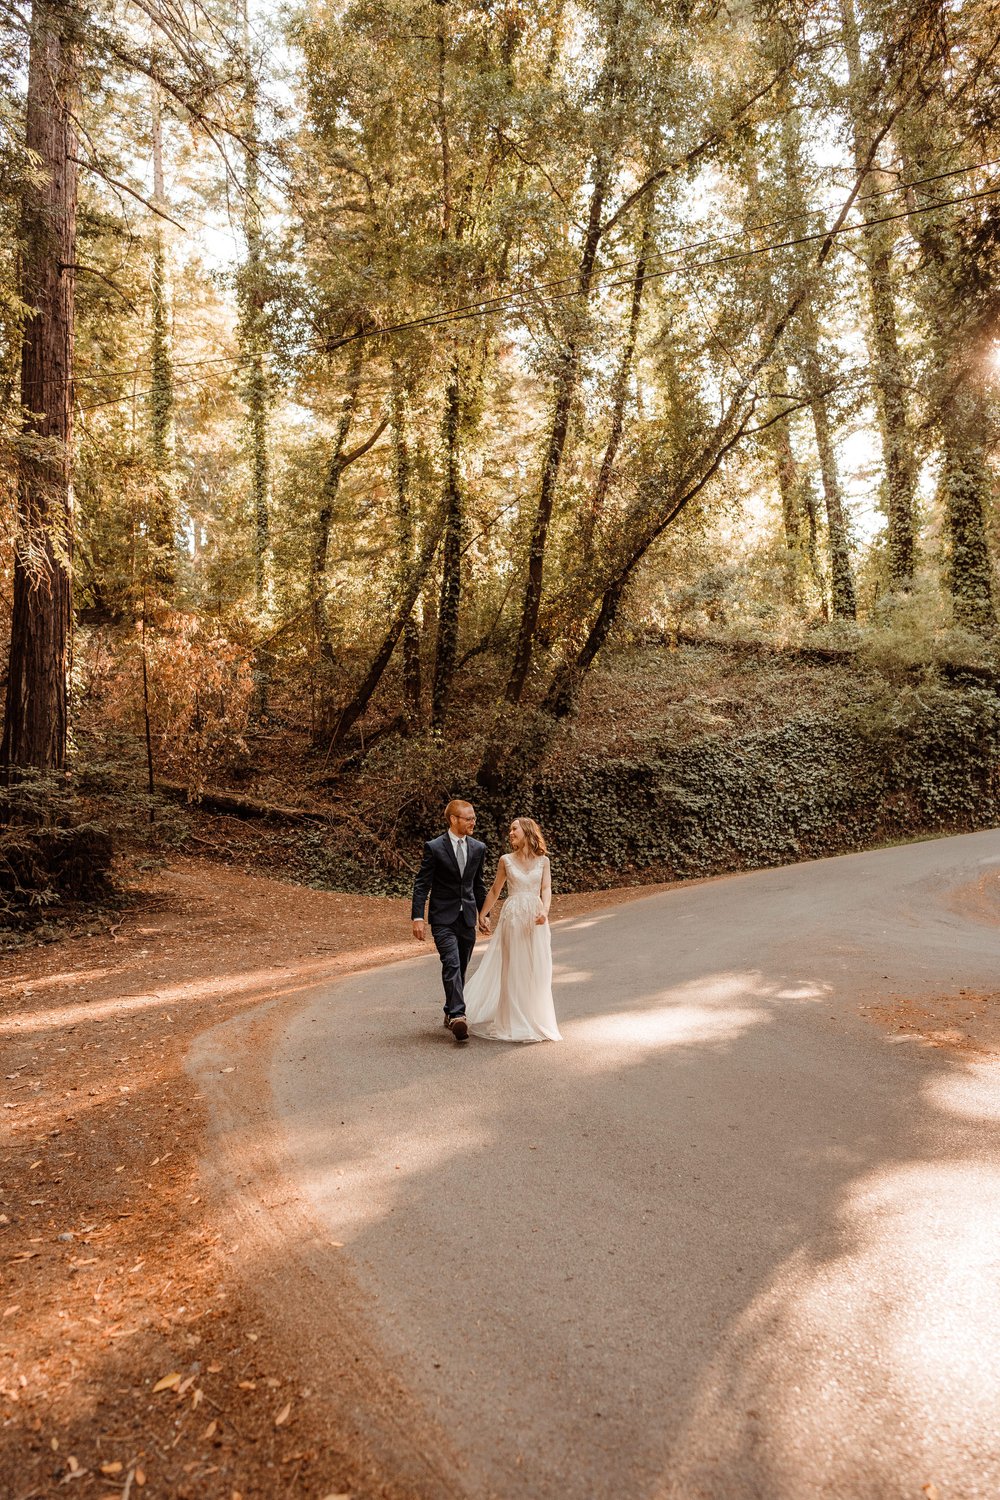 Wedding-in-the-Woods-Bride-and-Groom-Sunlit-Pictures-Beneath-Redwood-Forest (7).jpg